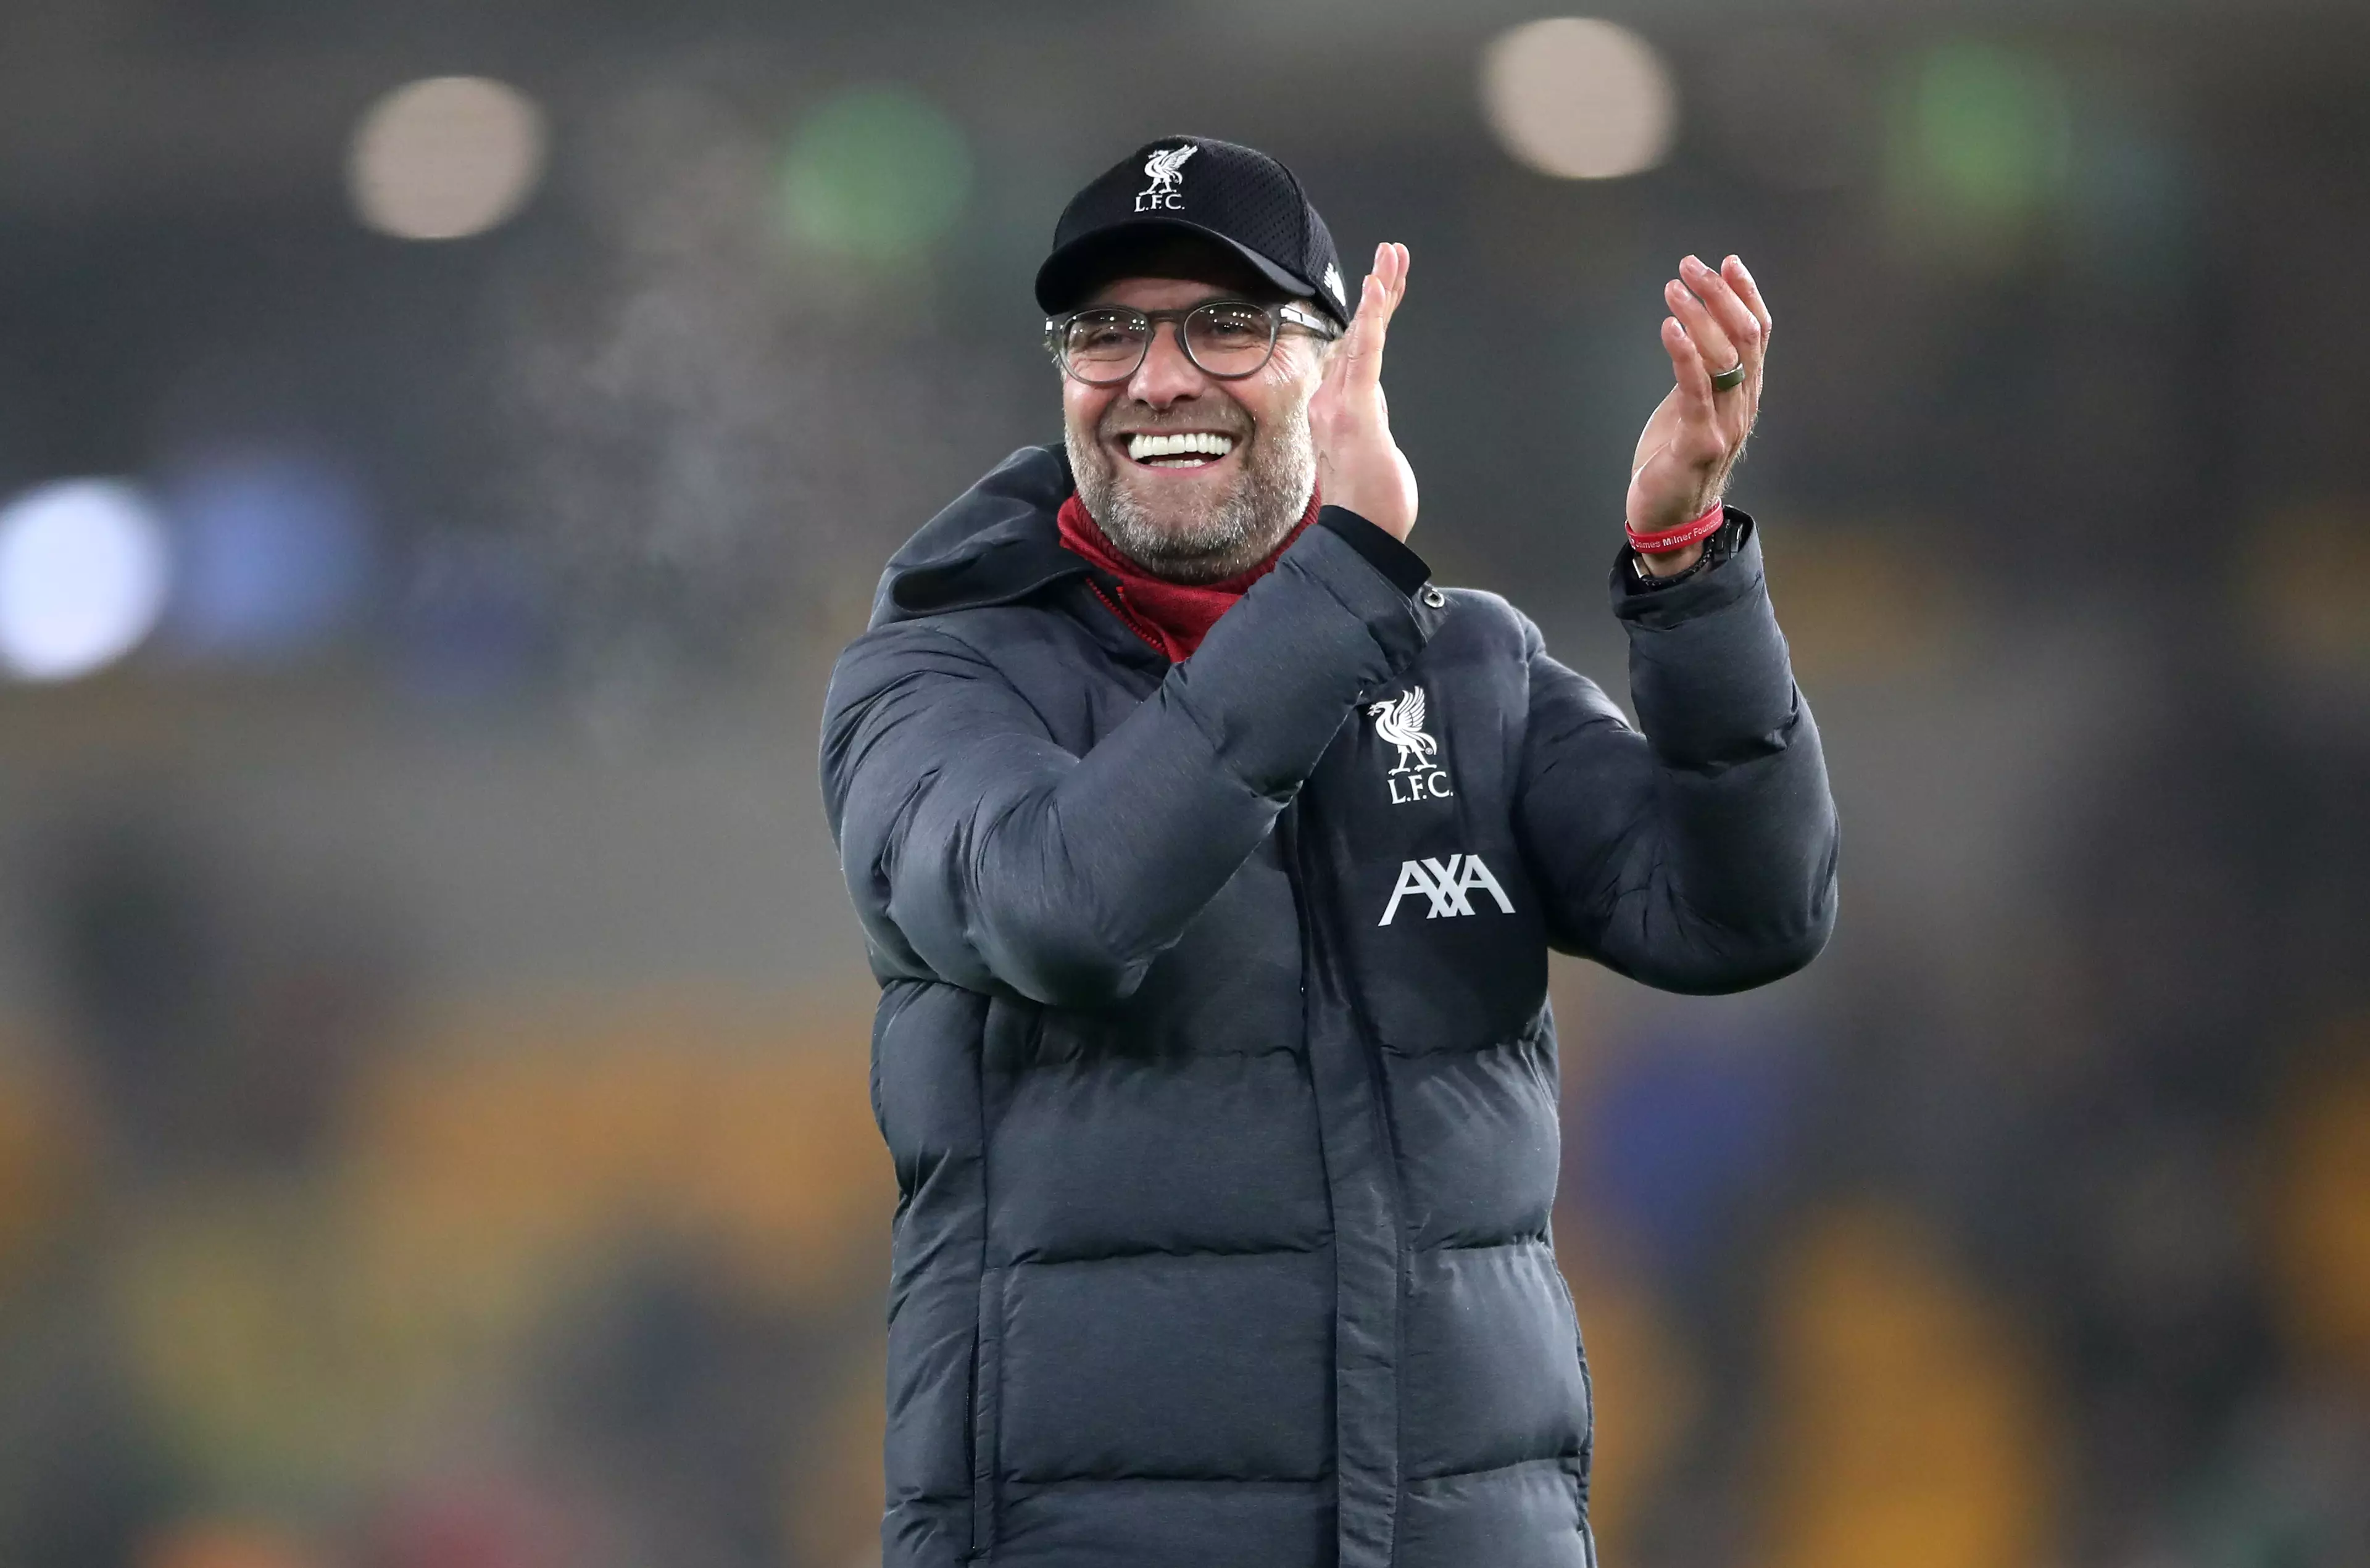 Jurgen Klopp's side would welcome a chance to finish the 2019/20 season (PA Images)